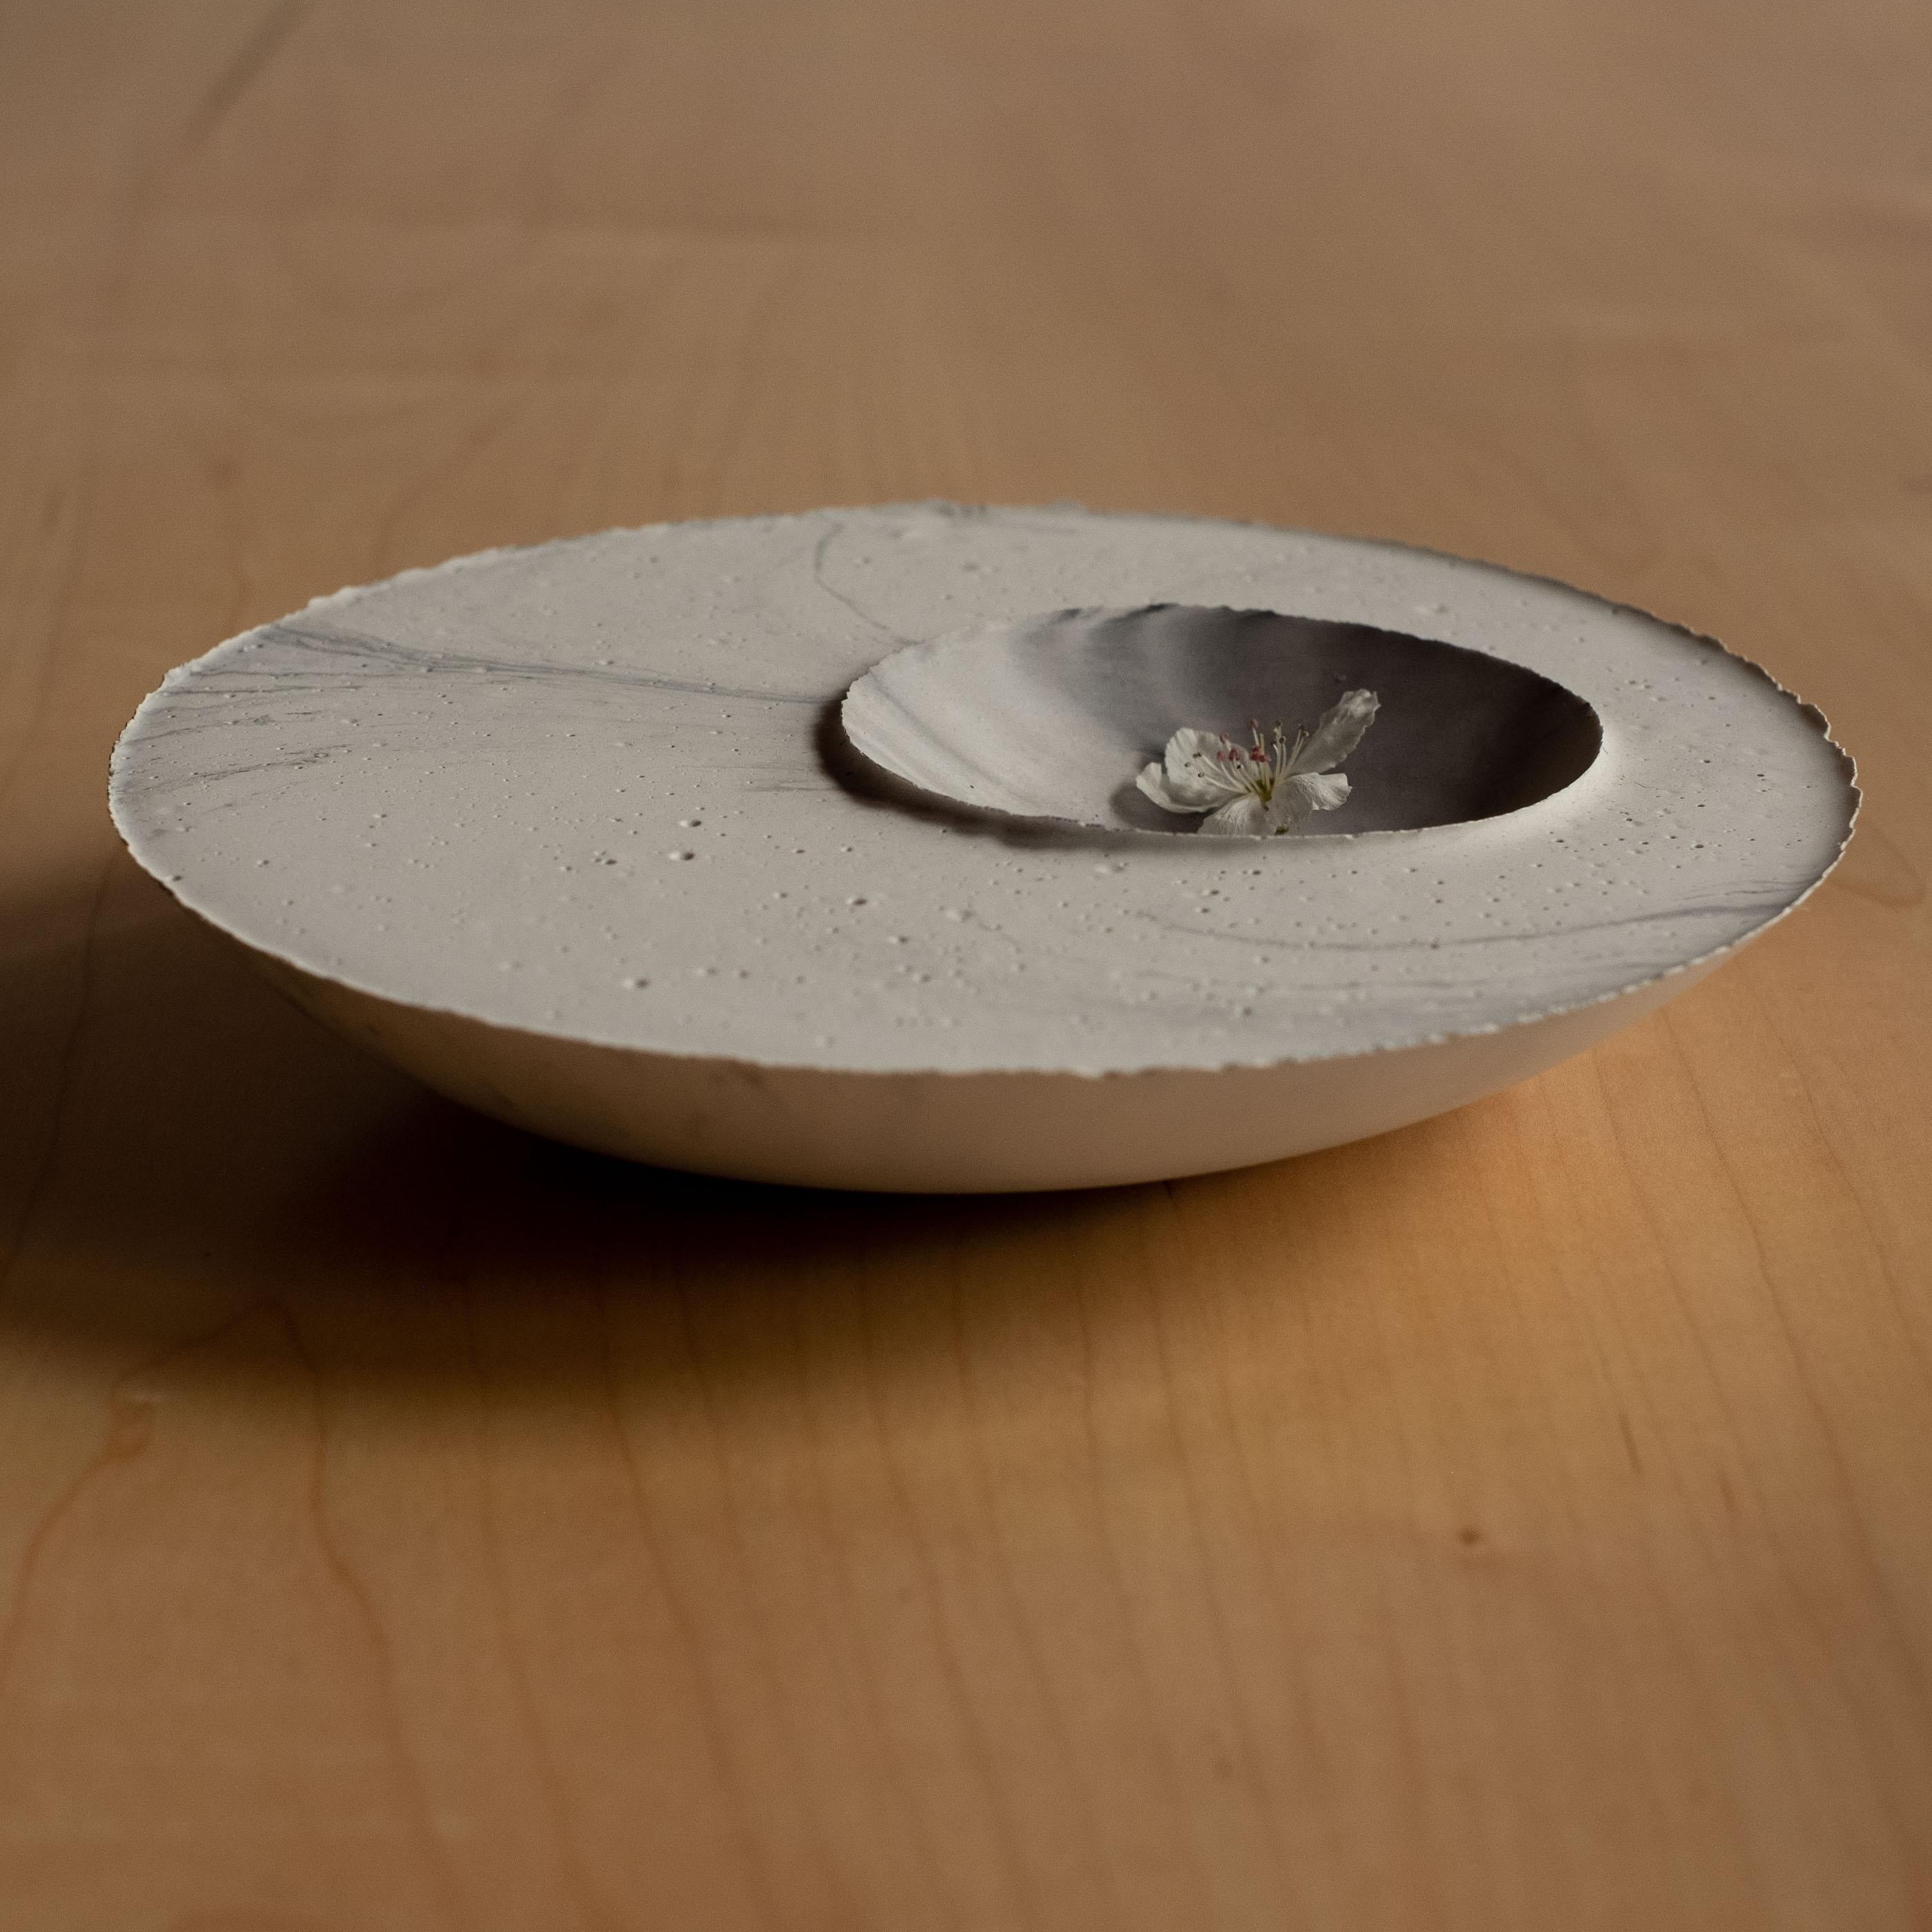 An edition of 150 unique bowls, the Concrete Series by UMÉ Studio expresses the tension between heavy concrete and its delicate edge generated by hand pouring. While one assumes concrete should be strong and durable, it is, at its core, fragile.